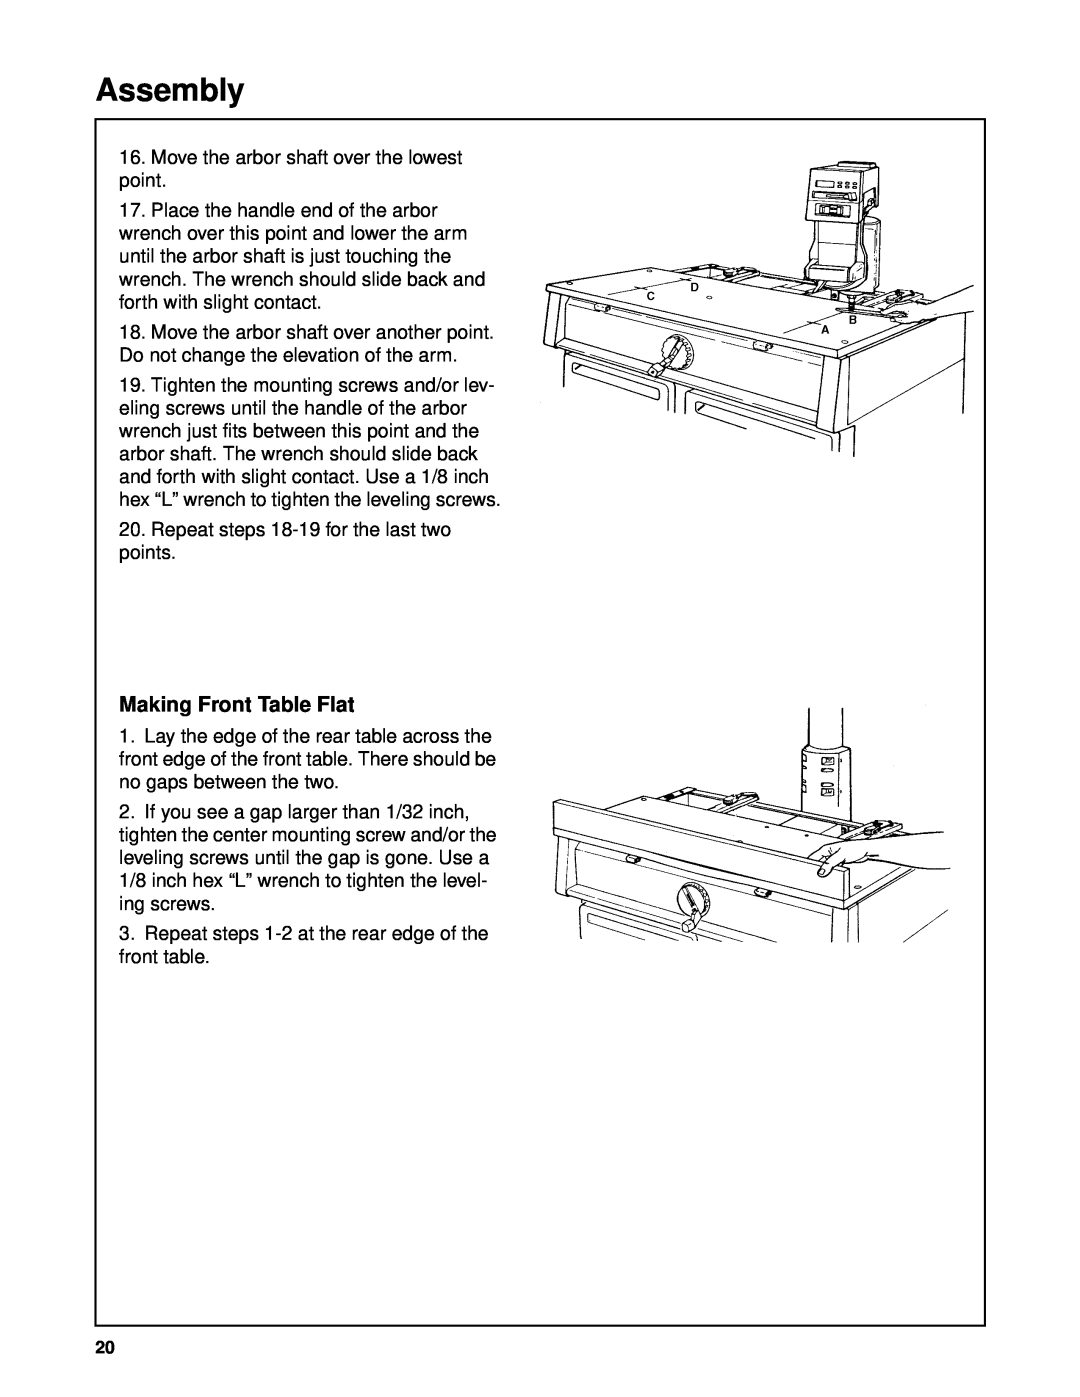 Craftsman 509399, 509398 owner manual Making Front Table Flat, Assembly 